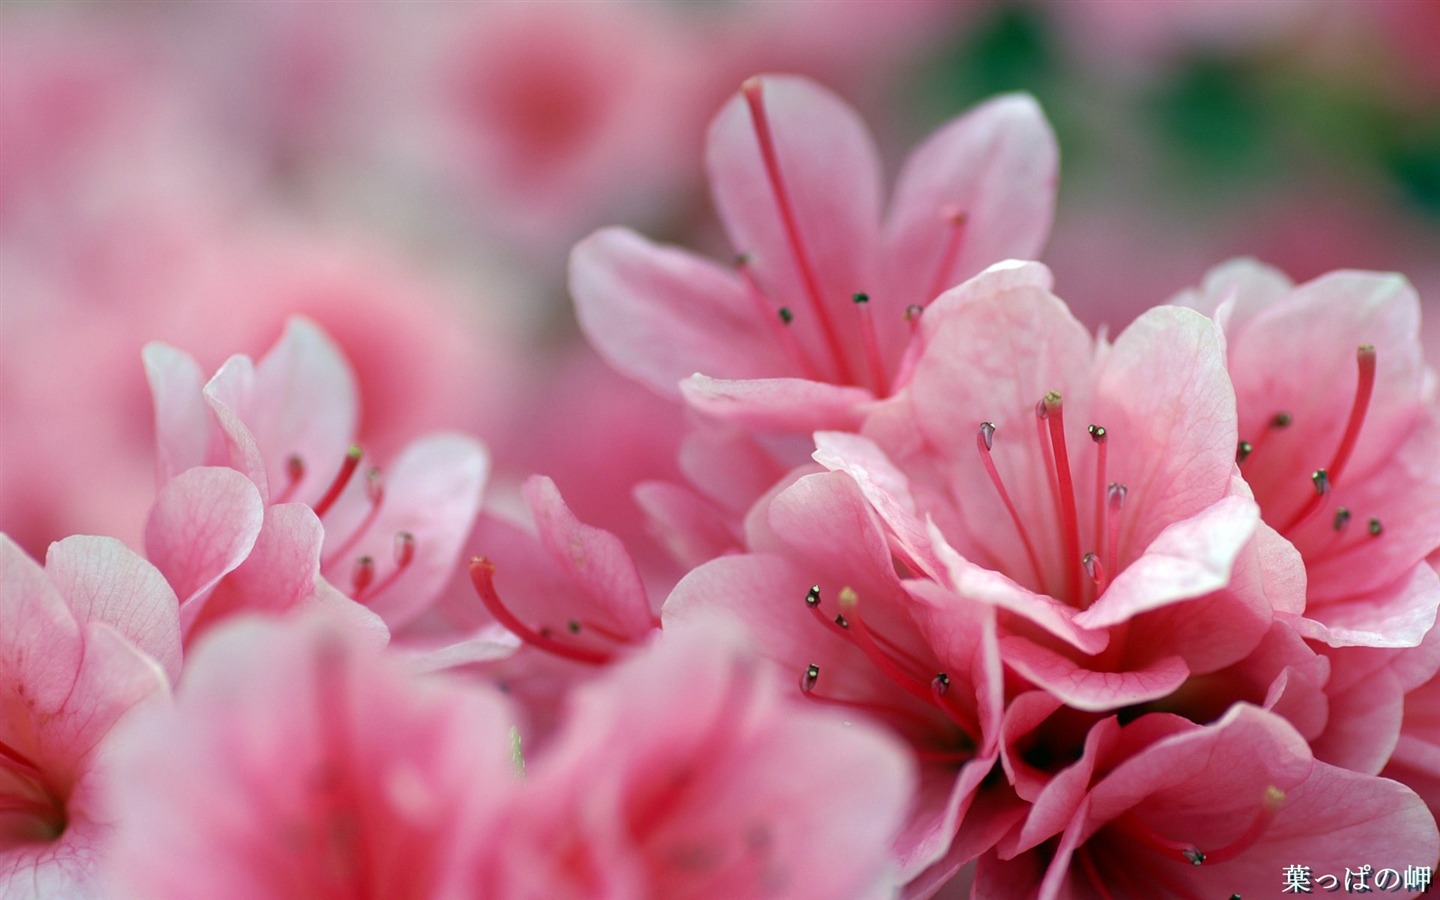 Personal Flowers HD Wallpapers #45 - 1440x900